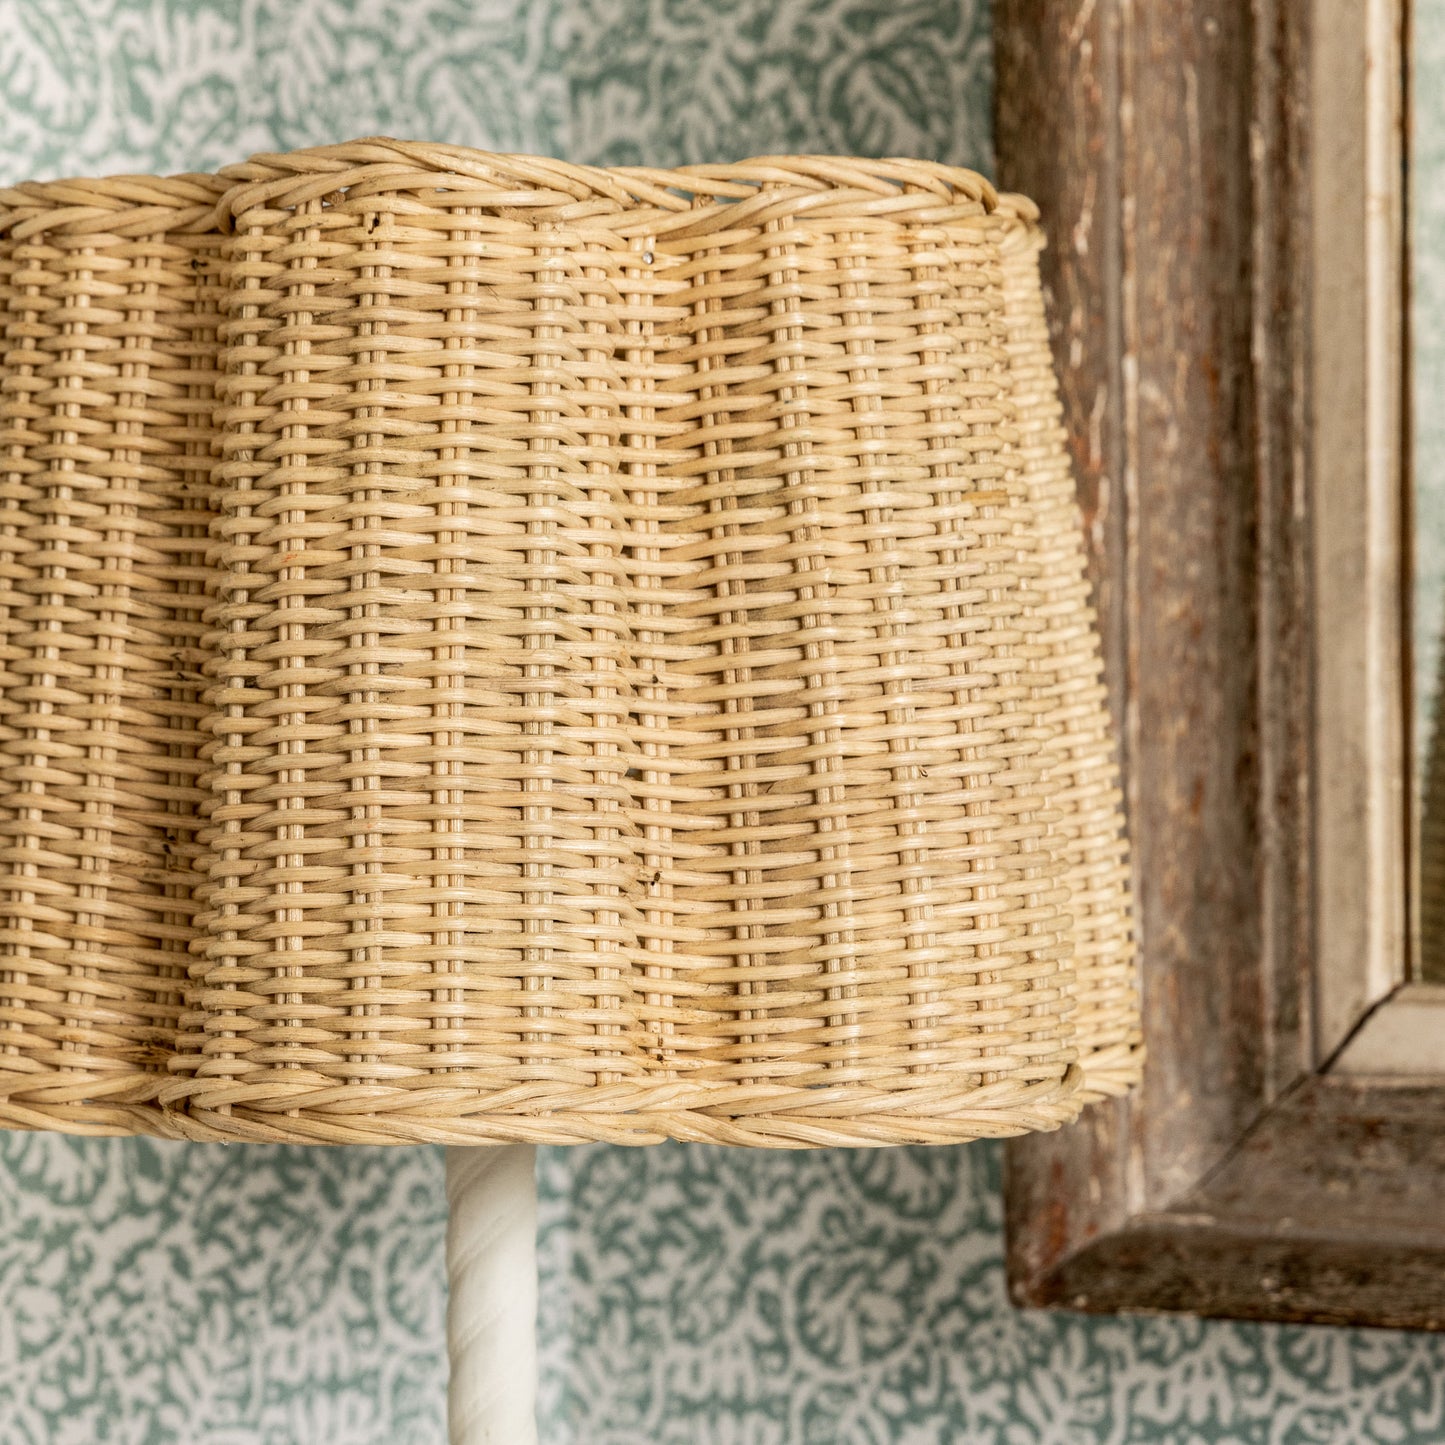 Hastshilp Clover Lampshade in Natural